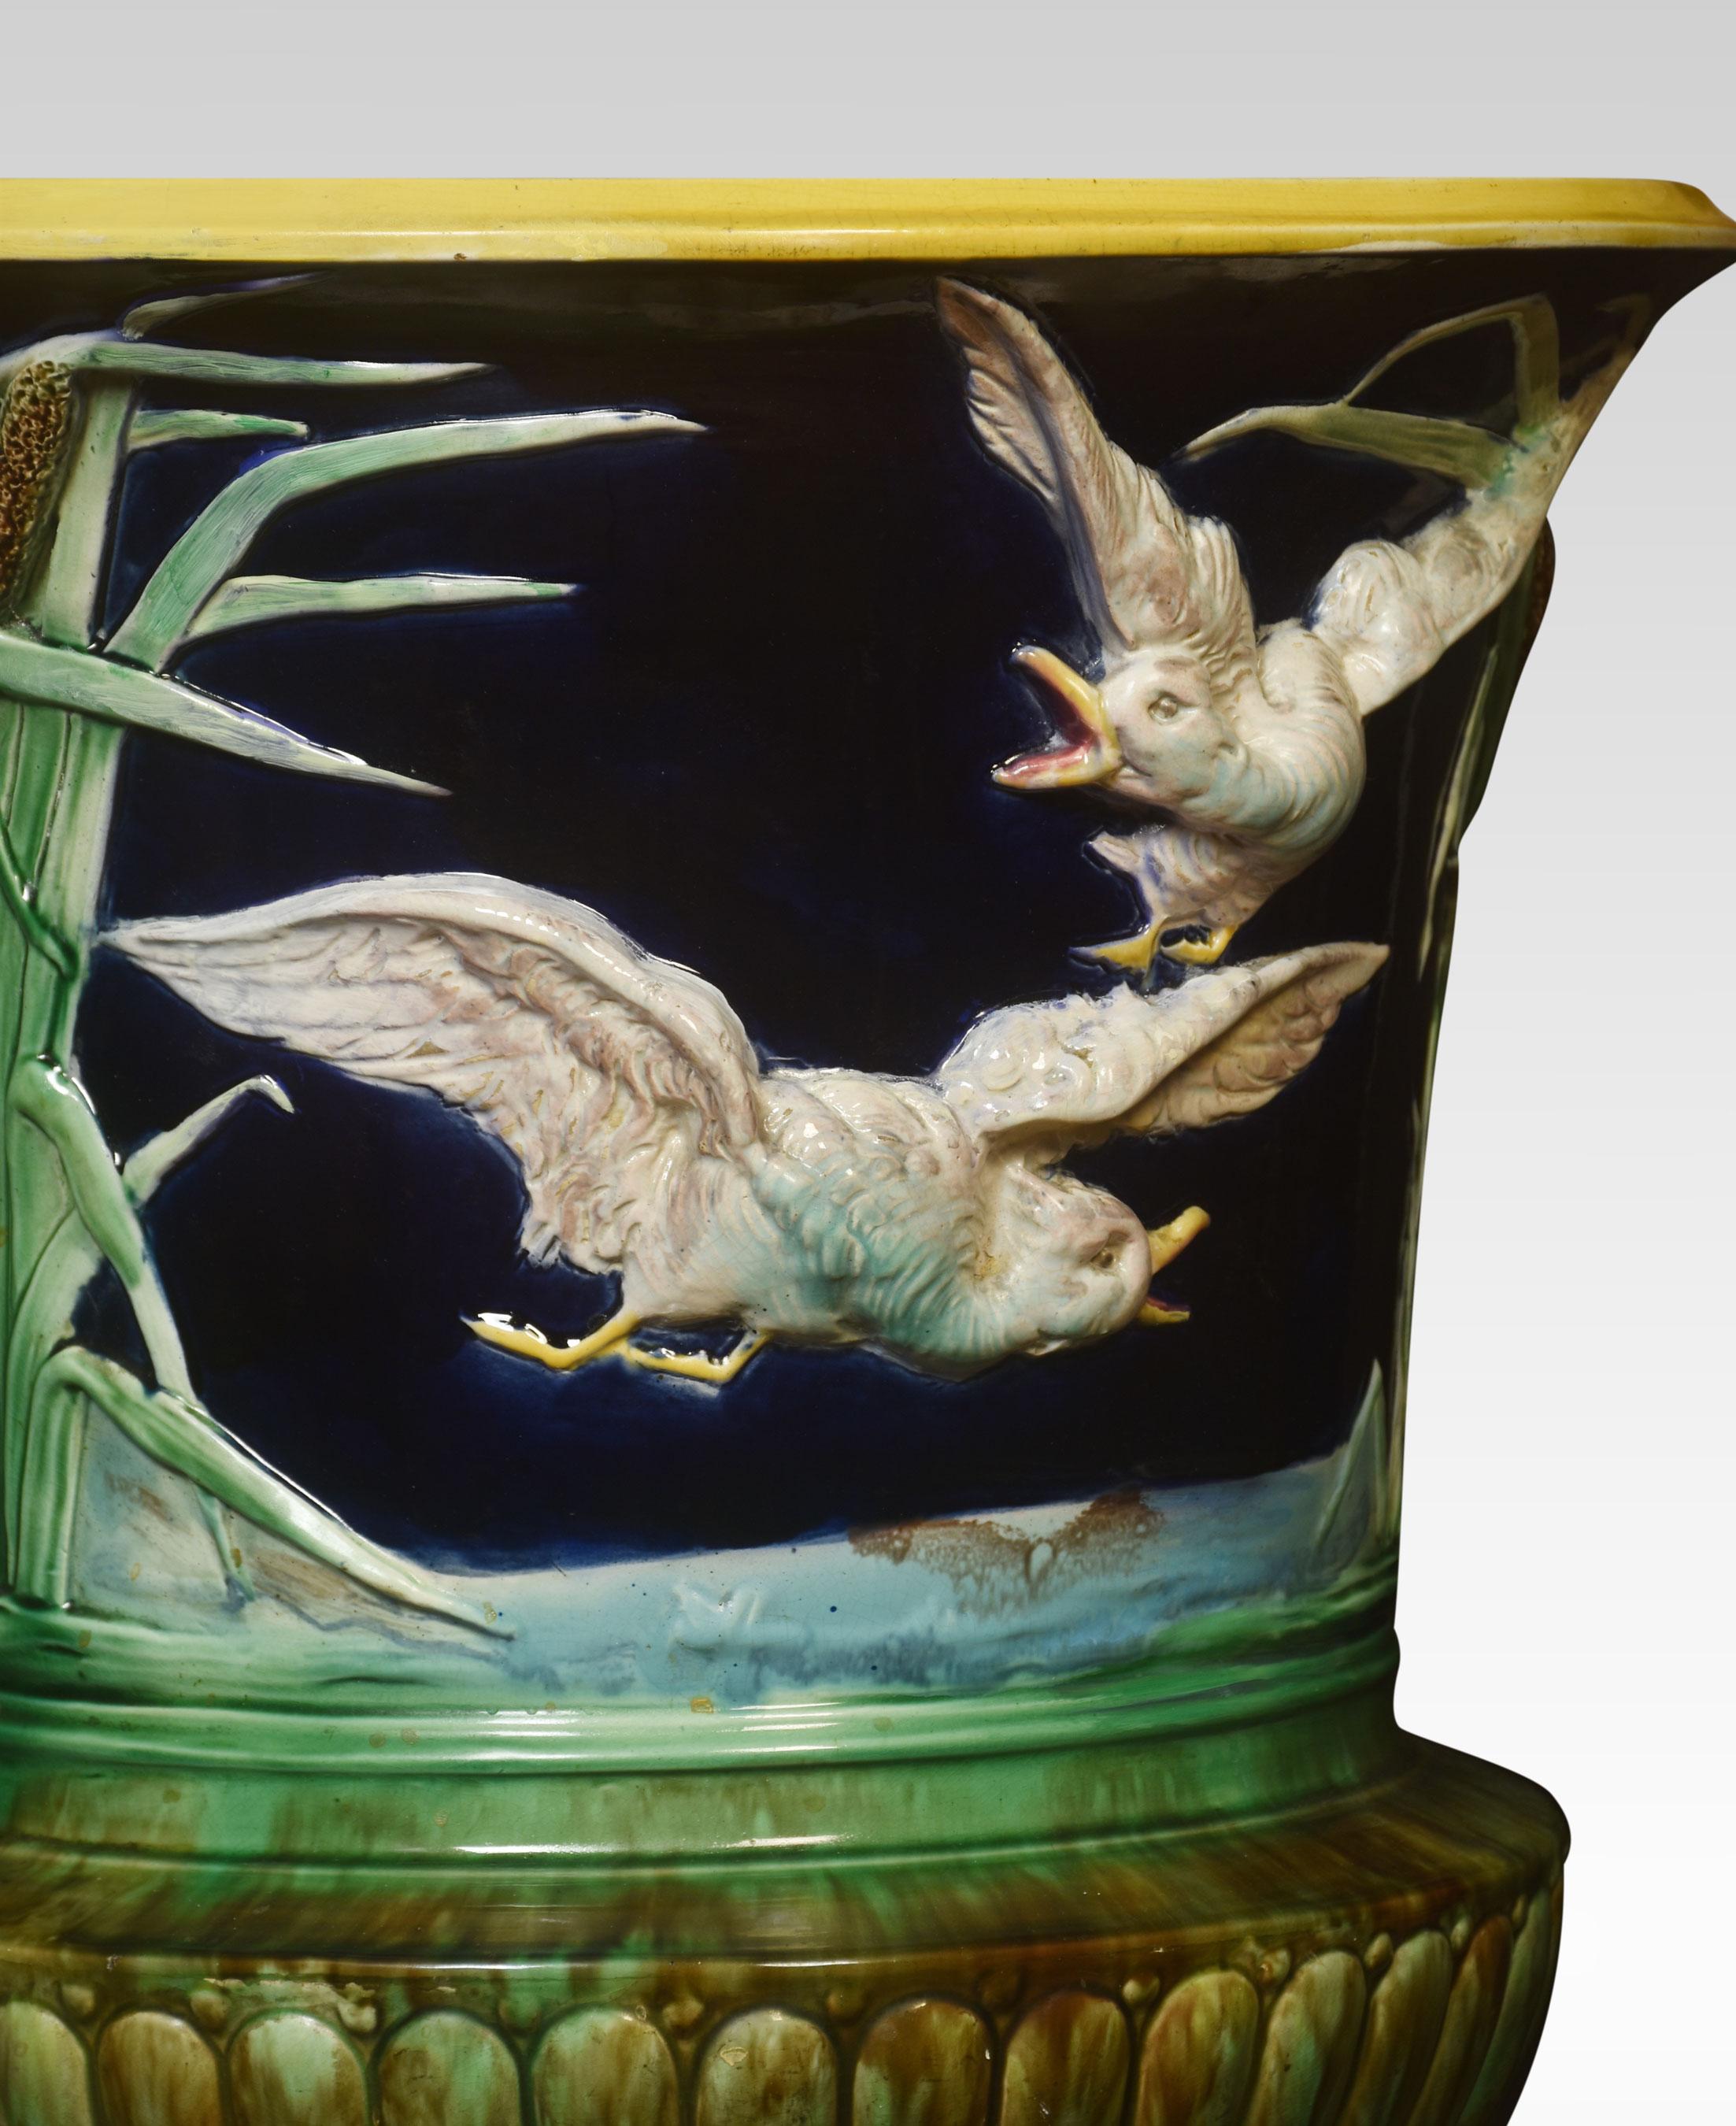 Thomas Forrester Majolica Jardiniere. Decorated with High-Relief very detailed painted birds and dogs with blue background. Raised up on paw feet.
Dimensions
Height 23 inches
Width 20.5 inches
Depth 20.5 inches.